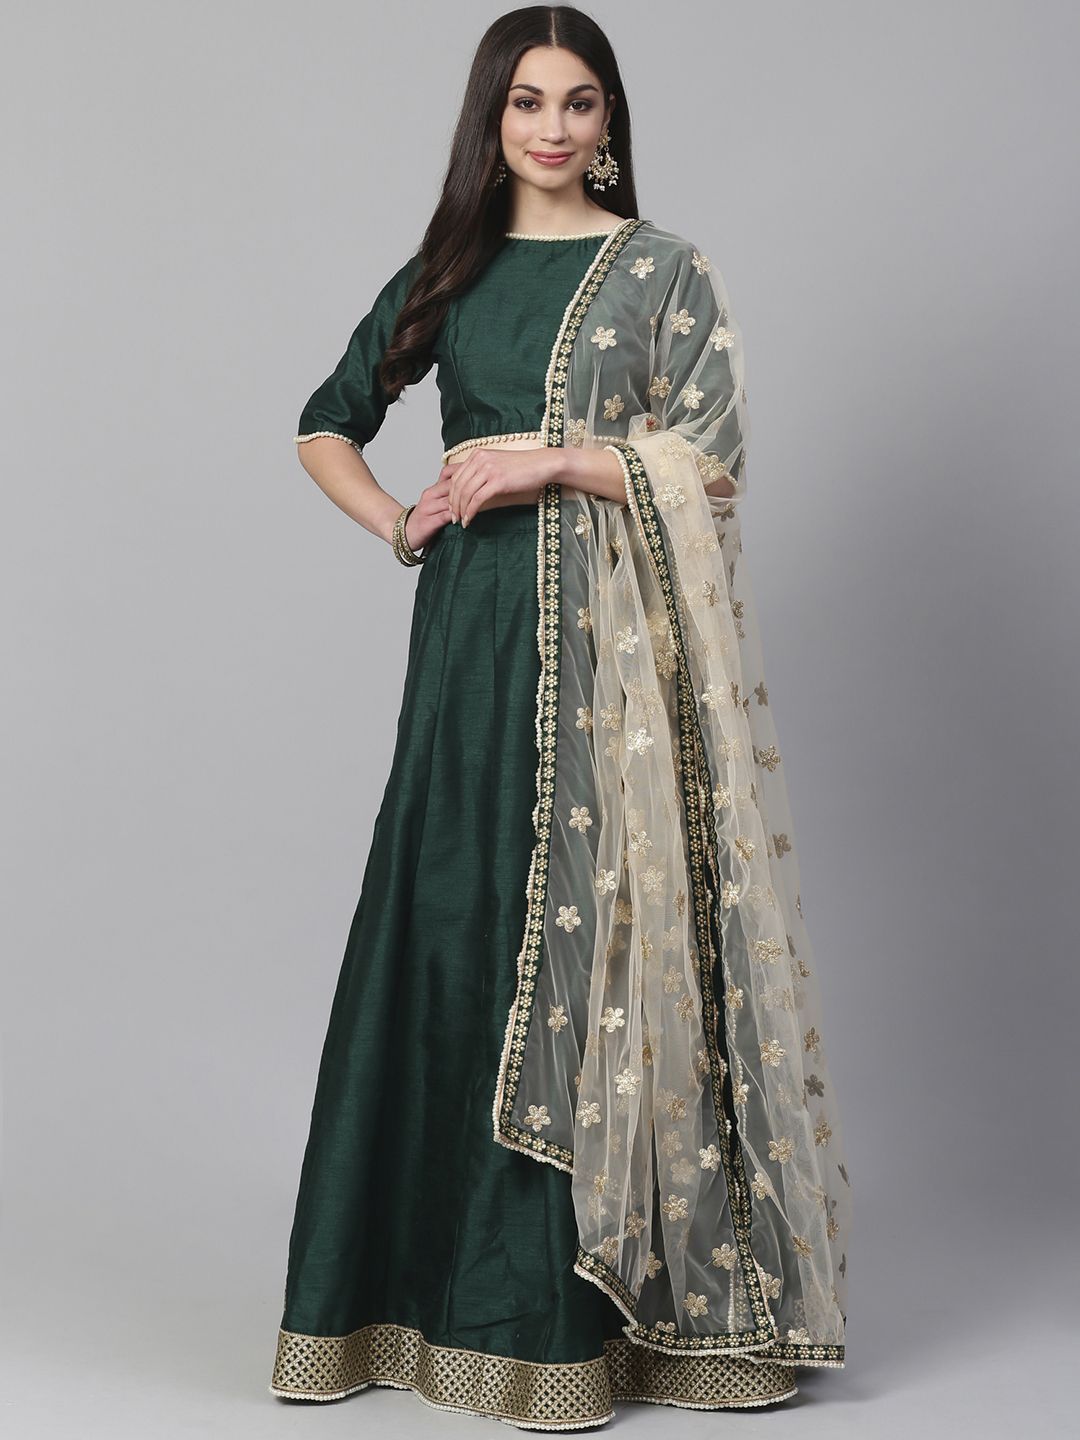 Readiprint Fashions Green & Beige Solid Semi-Stitched Lehenga & Unstitched Blouse with Dupatta Price in India